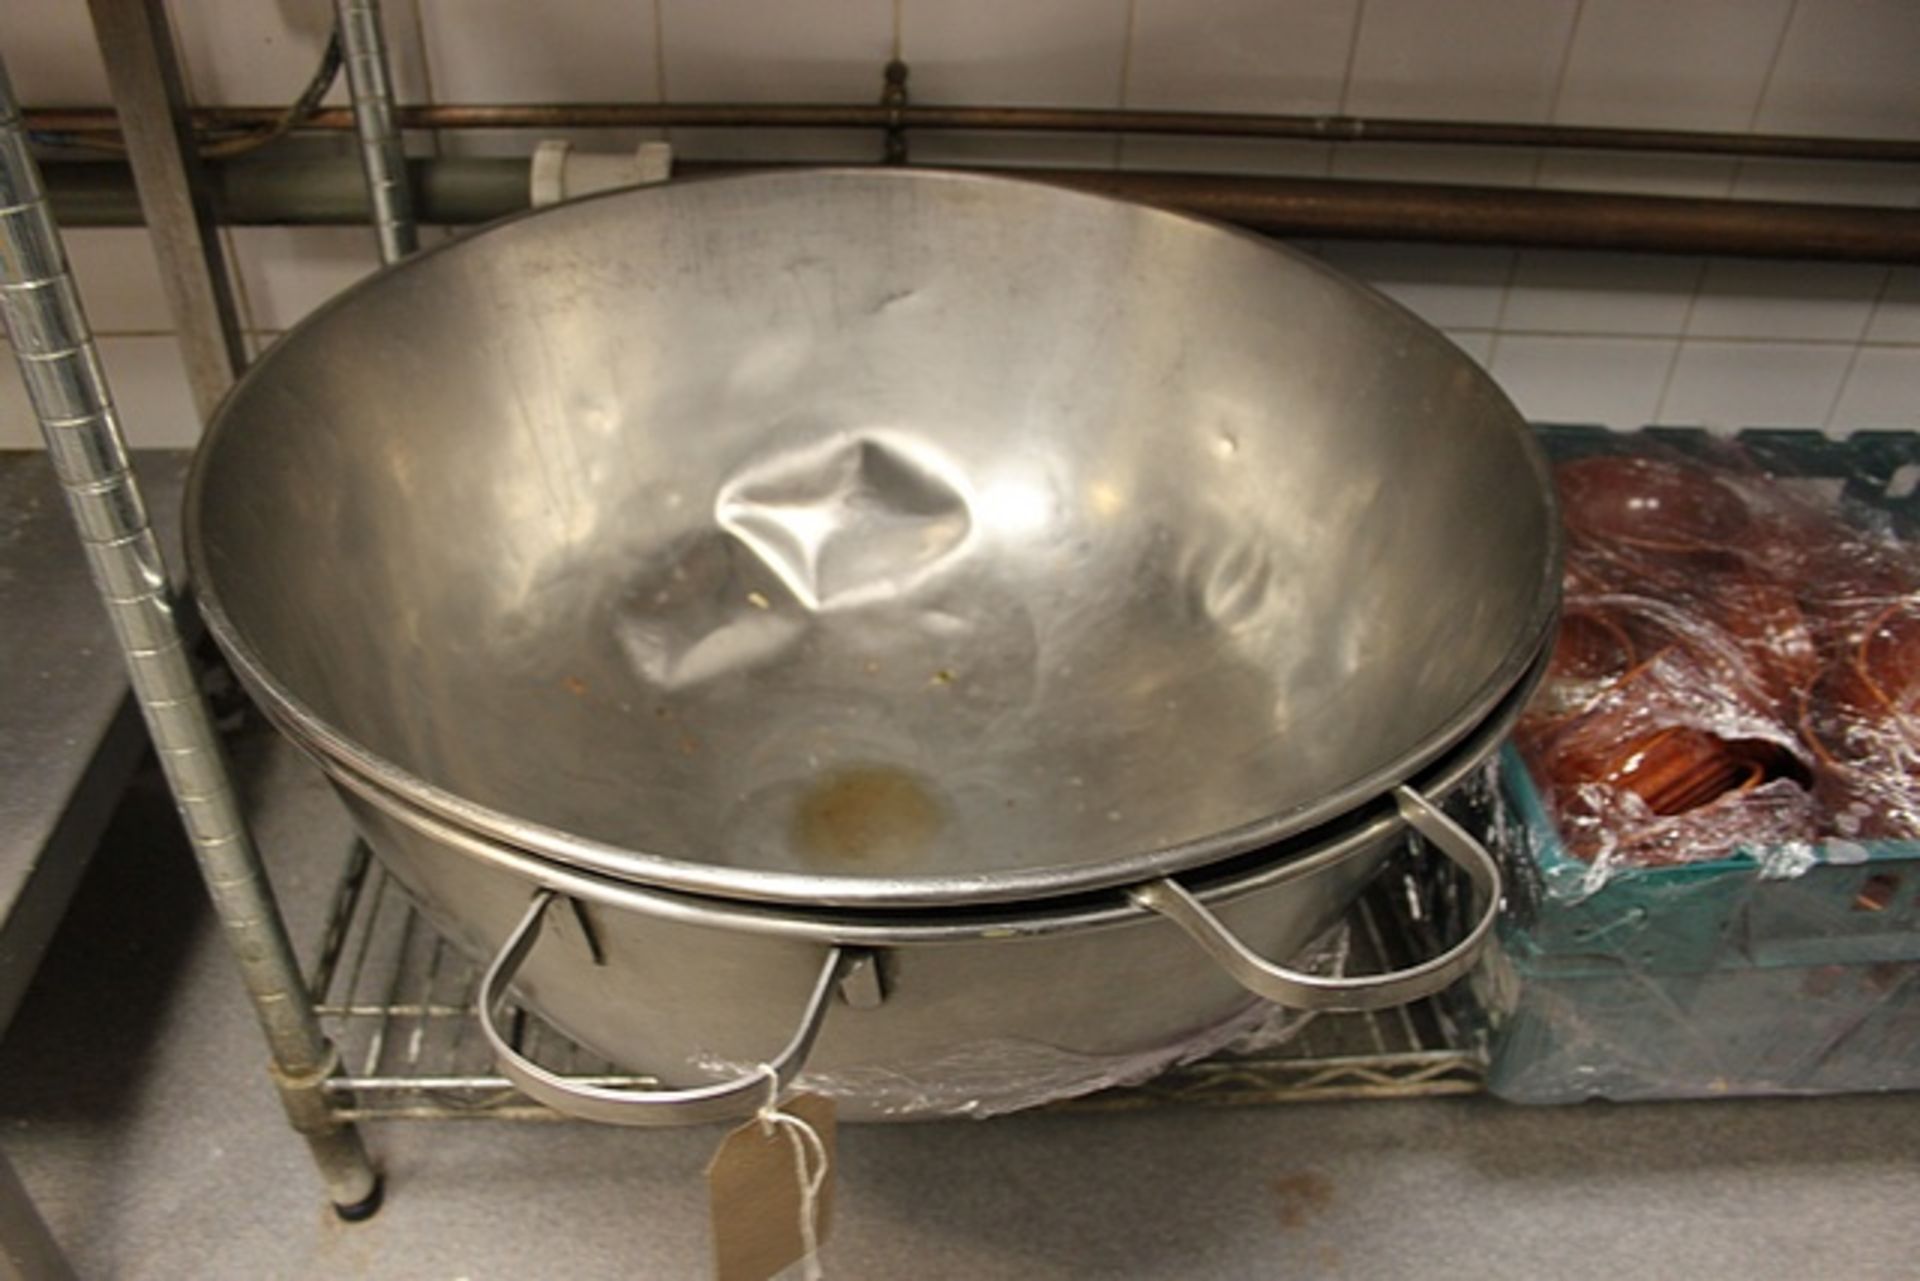 2 x large stainless steel mixing bowls